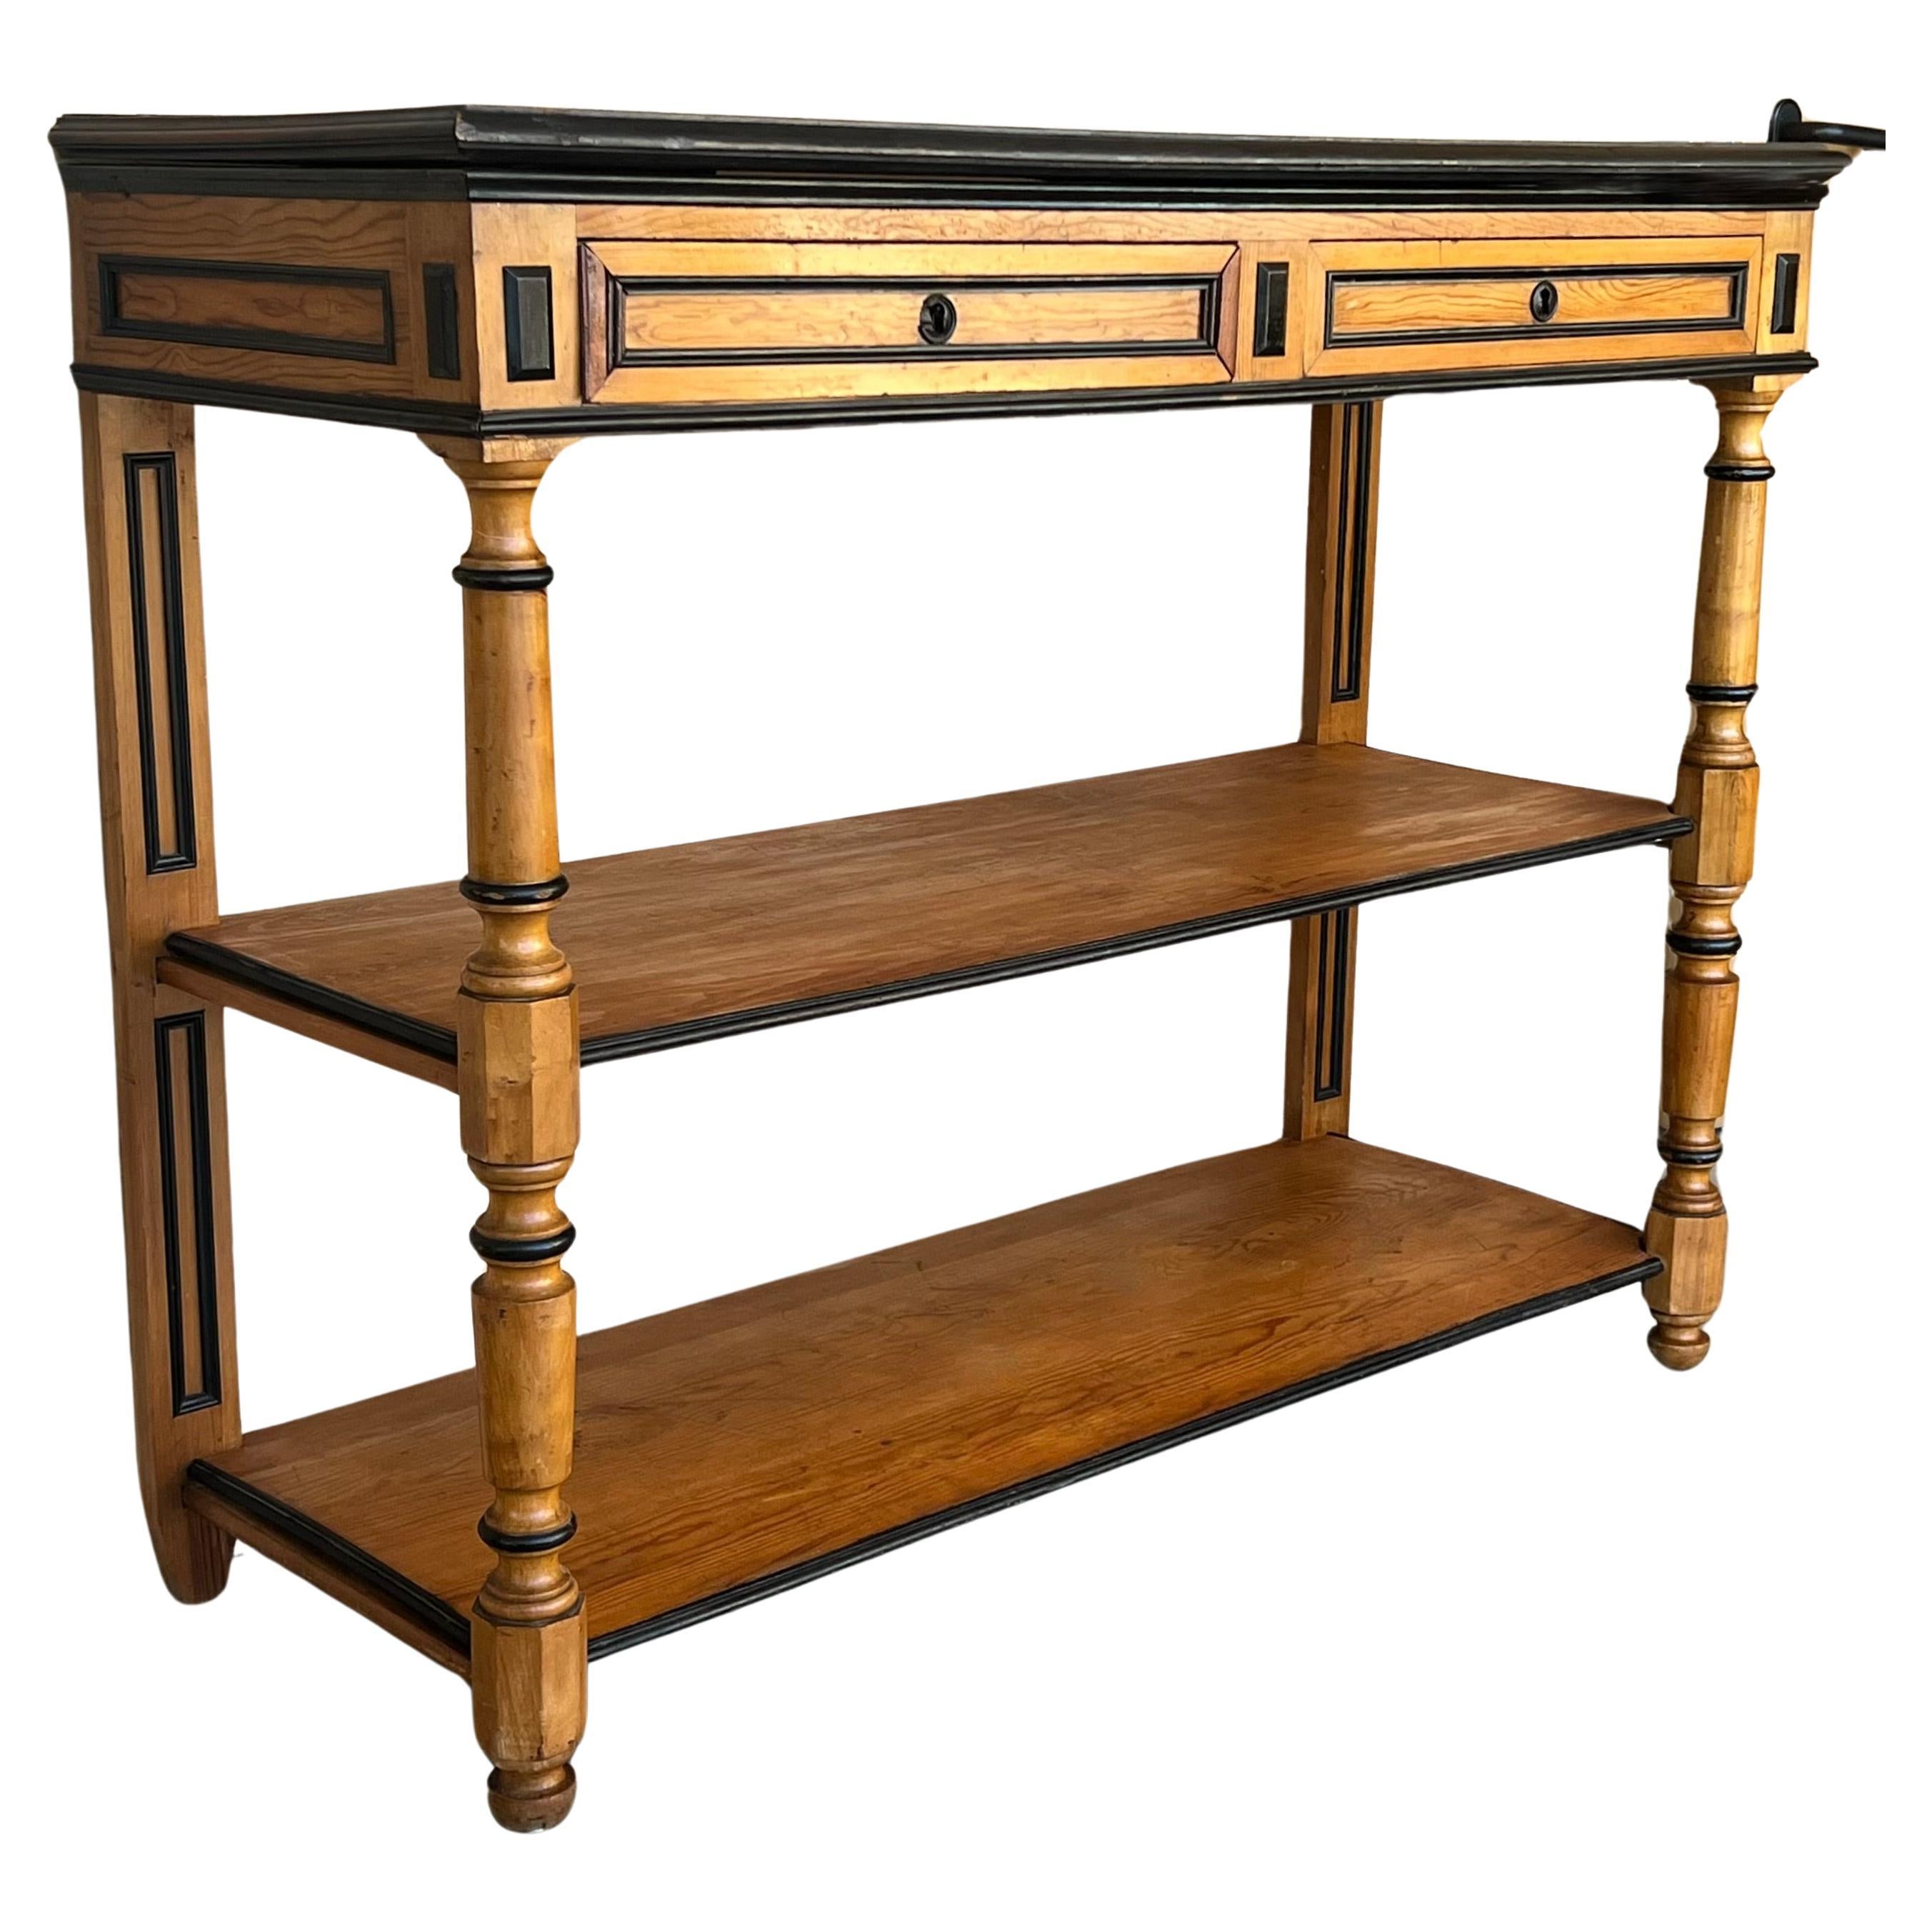 Found in England, this circa 1900 fruitwood server table has a top with two drawers that have a functional lock and two lower tier shelves. Decorative turned legs in the front,nicely figured ebonized throughout. Unknown maker.  Very good overall